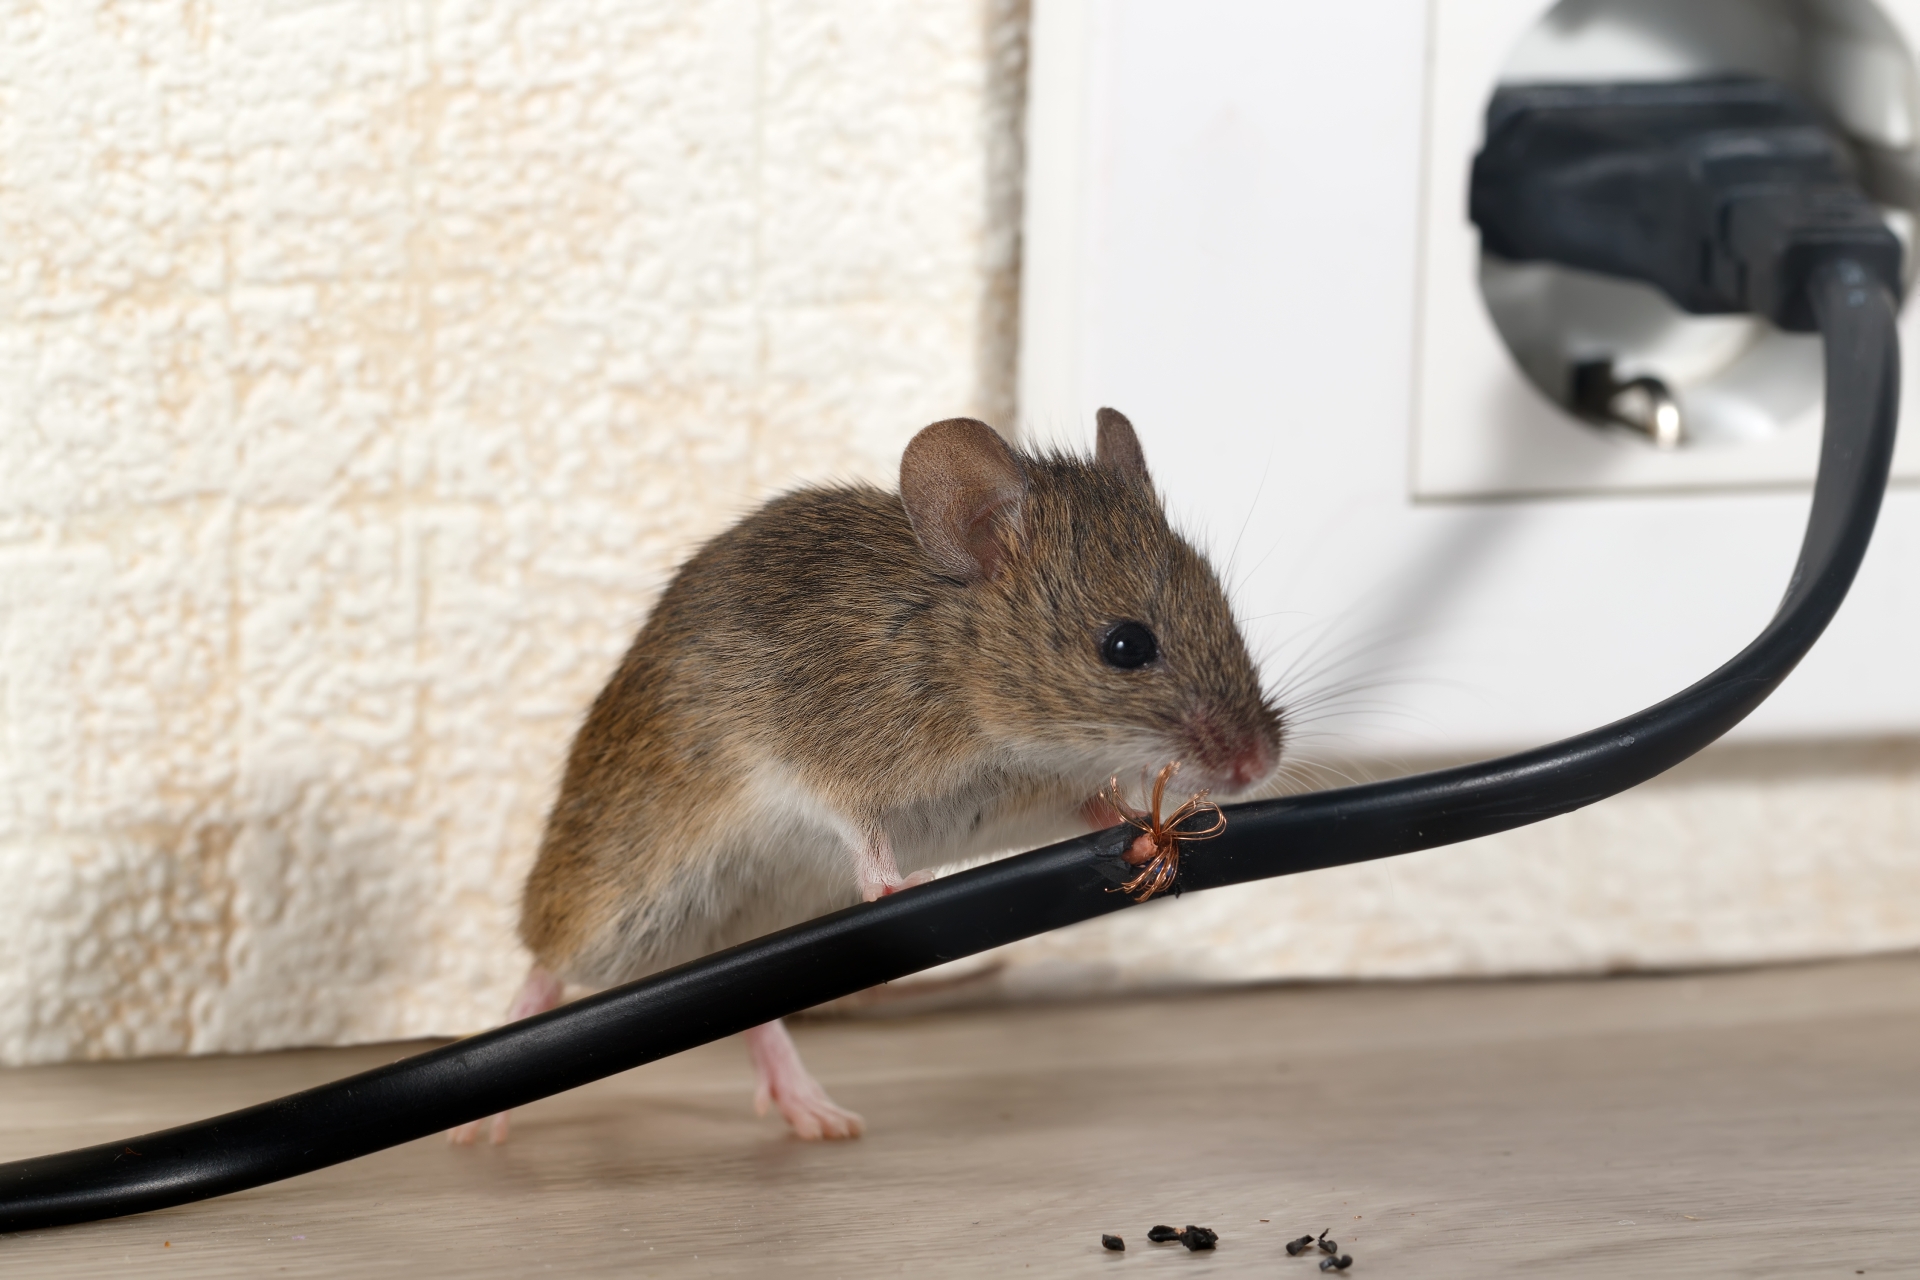 Mice Infestation, Pest Control in Westcombe Park, SE3. Call Now 020 8166 9746